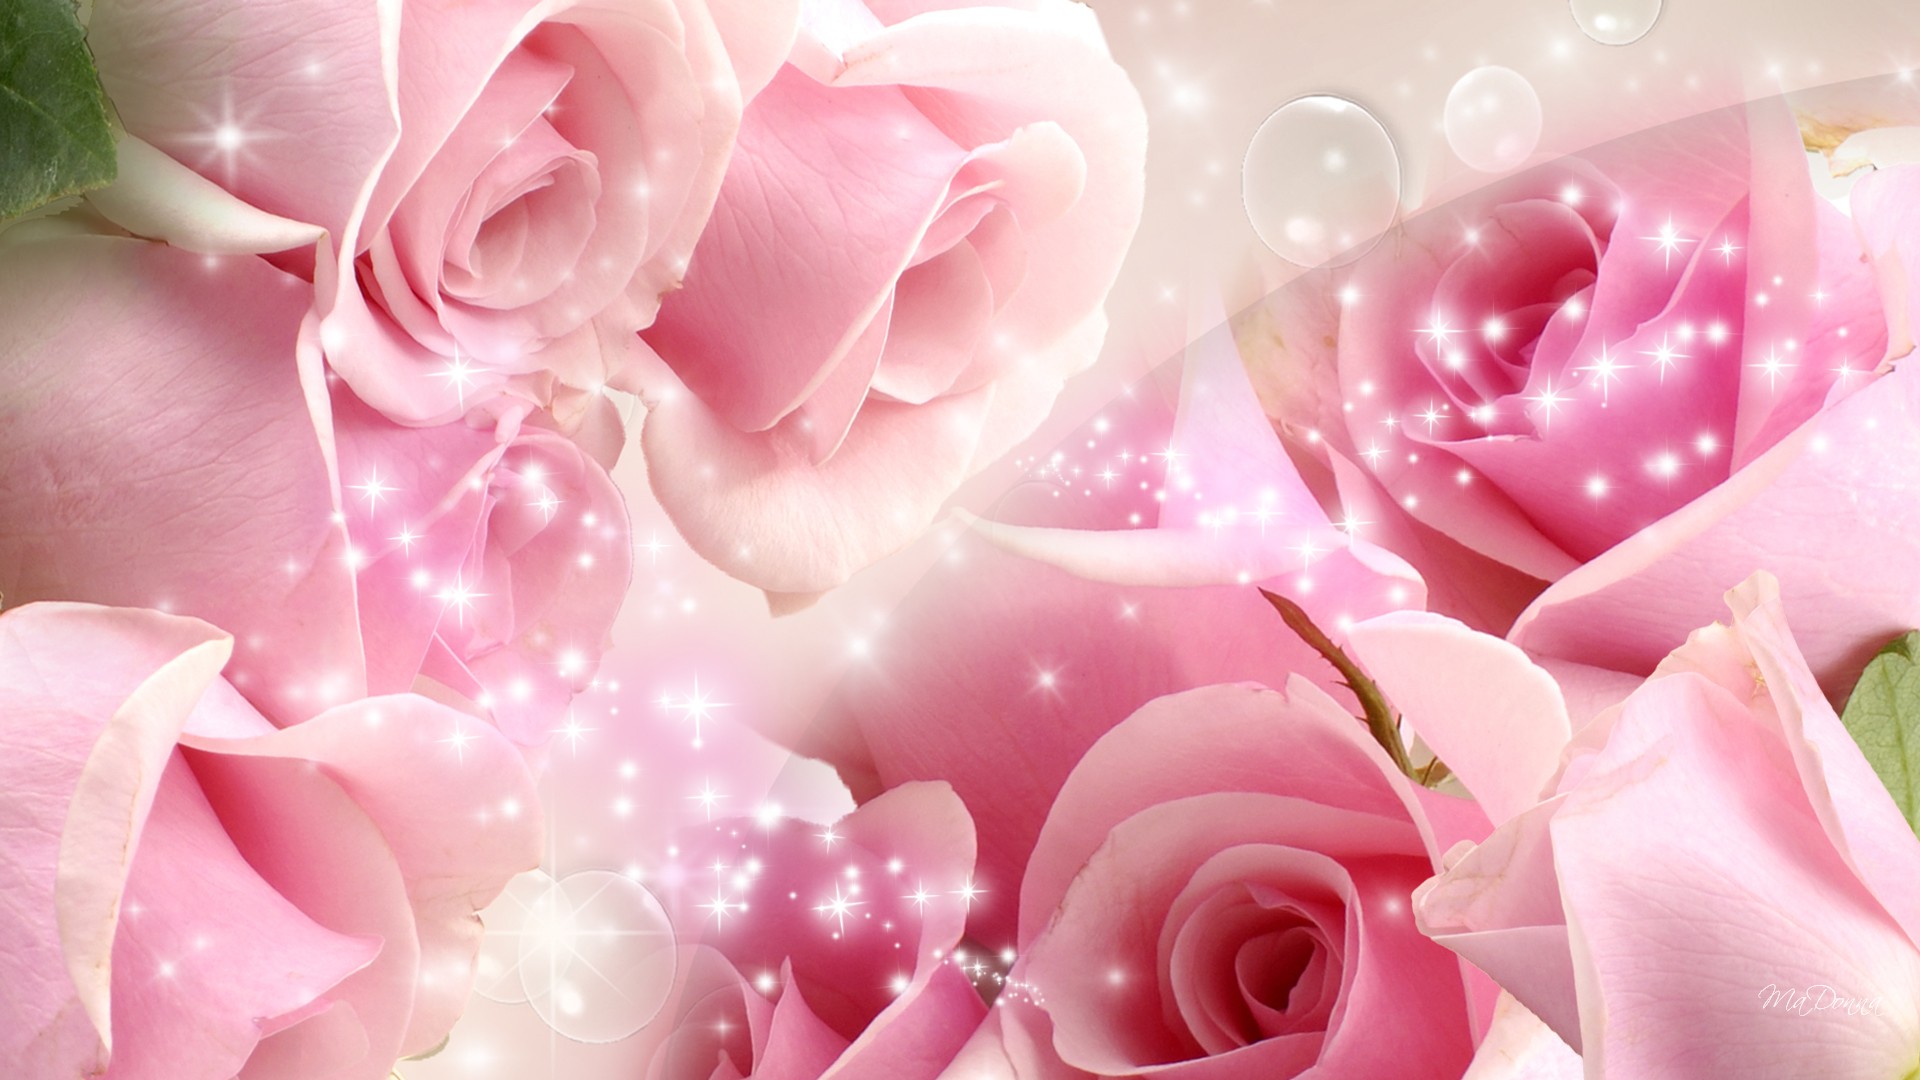 Most Beautiful Pink Roses Wallpaper Full HD Pictures